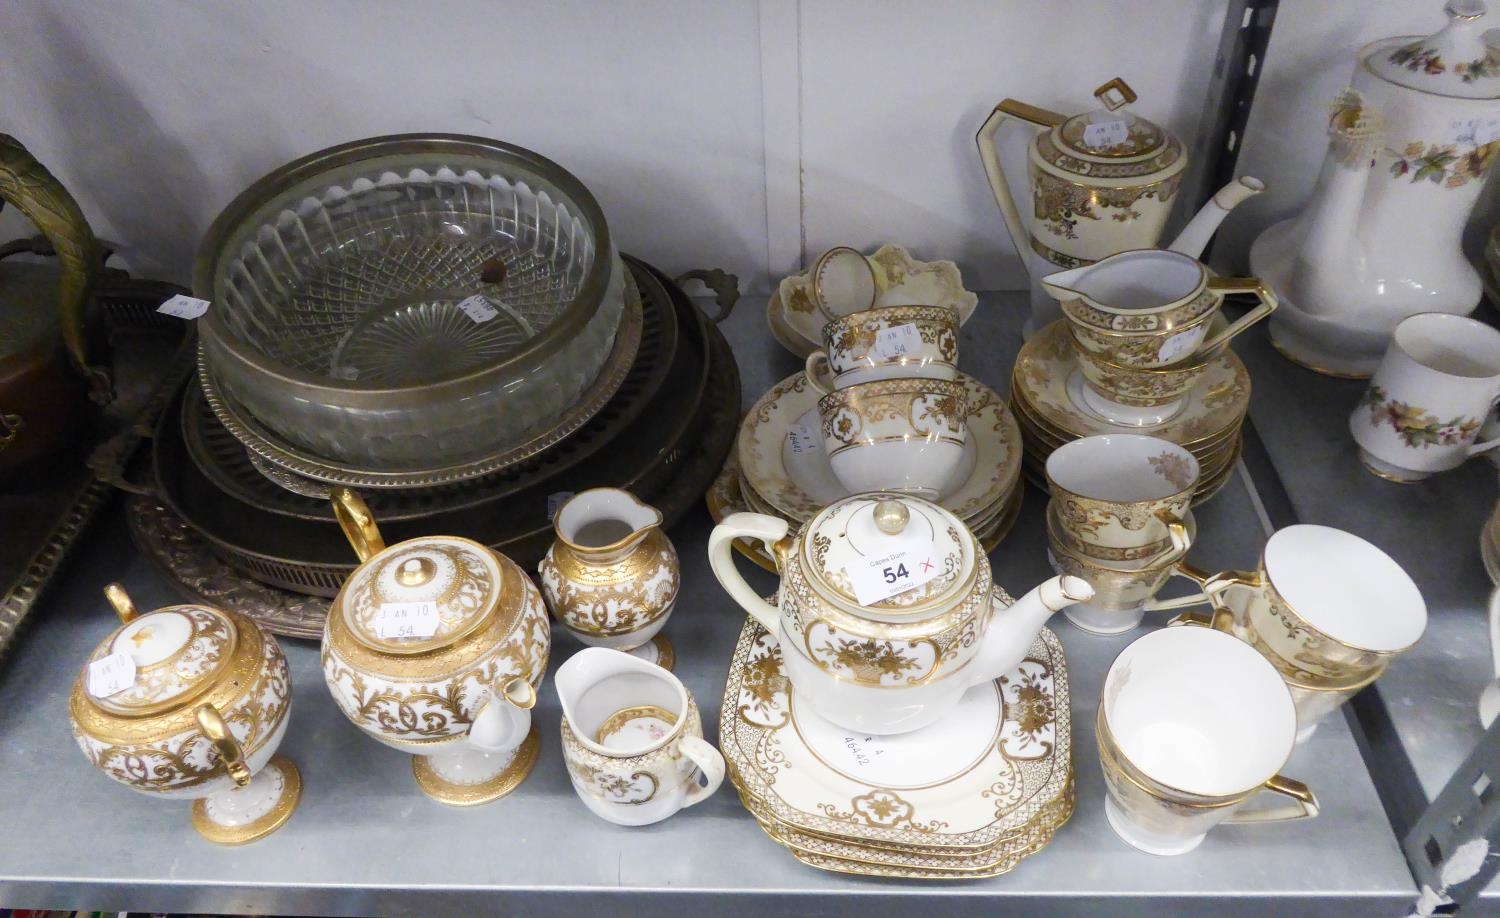 FIFTEEN PIECE NORITAKE PORCELAIN COFFEE SERVICE FOR IX PERSONS, with gilt and lemon borders, and